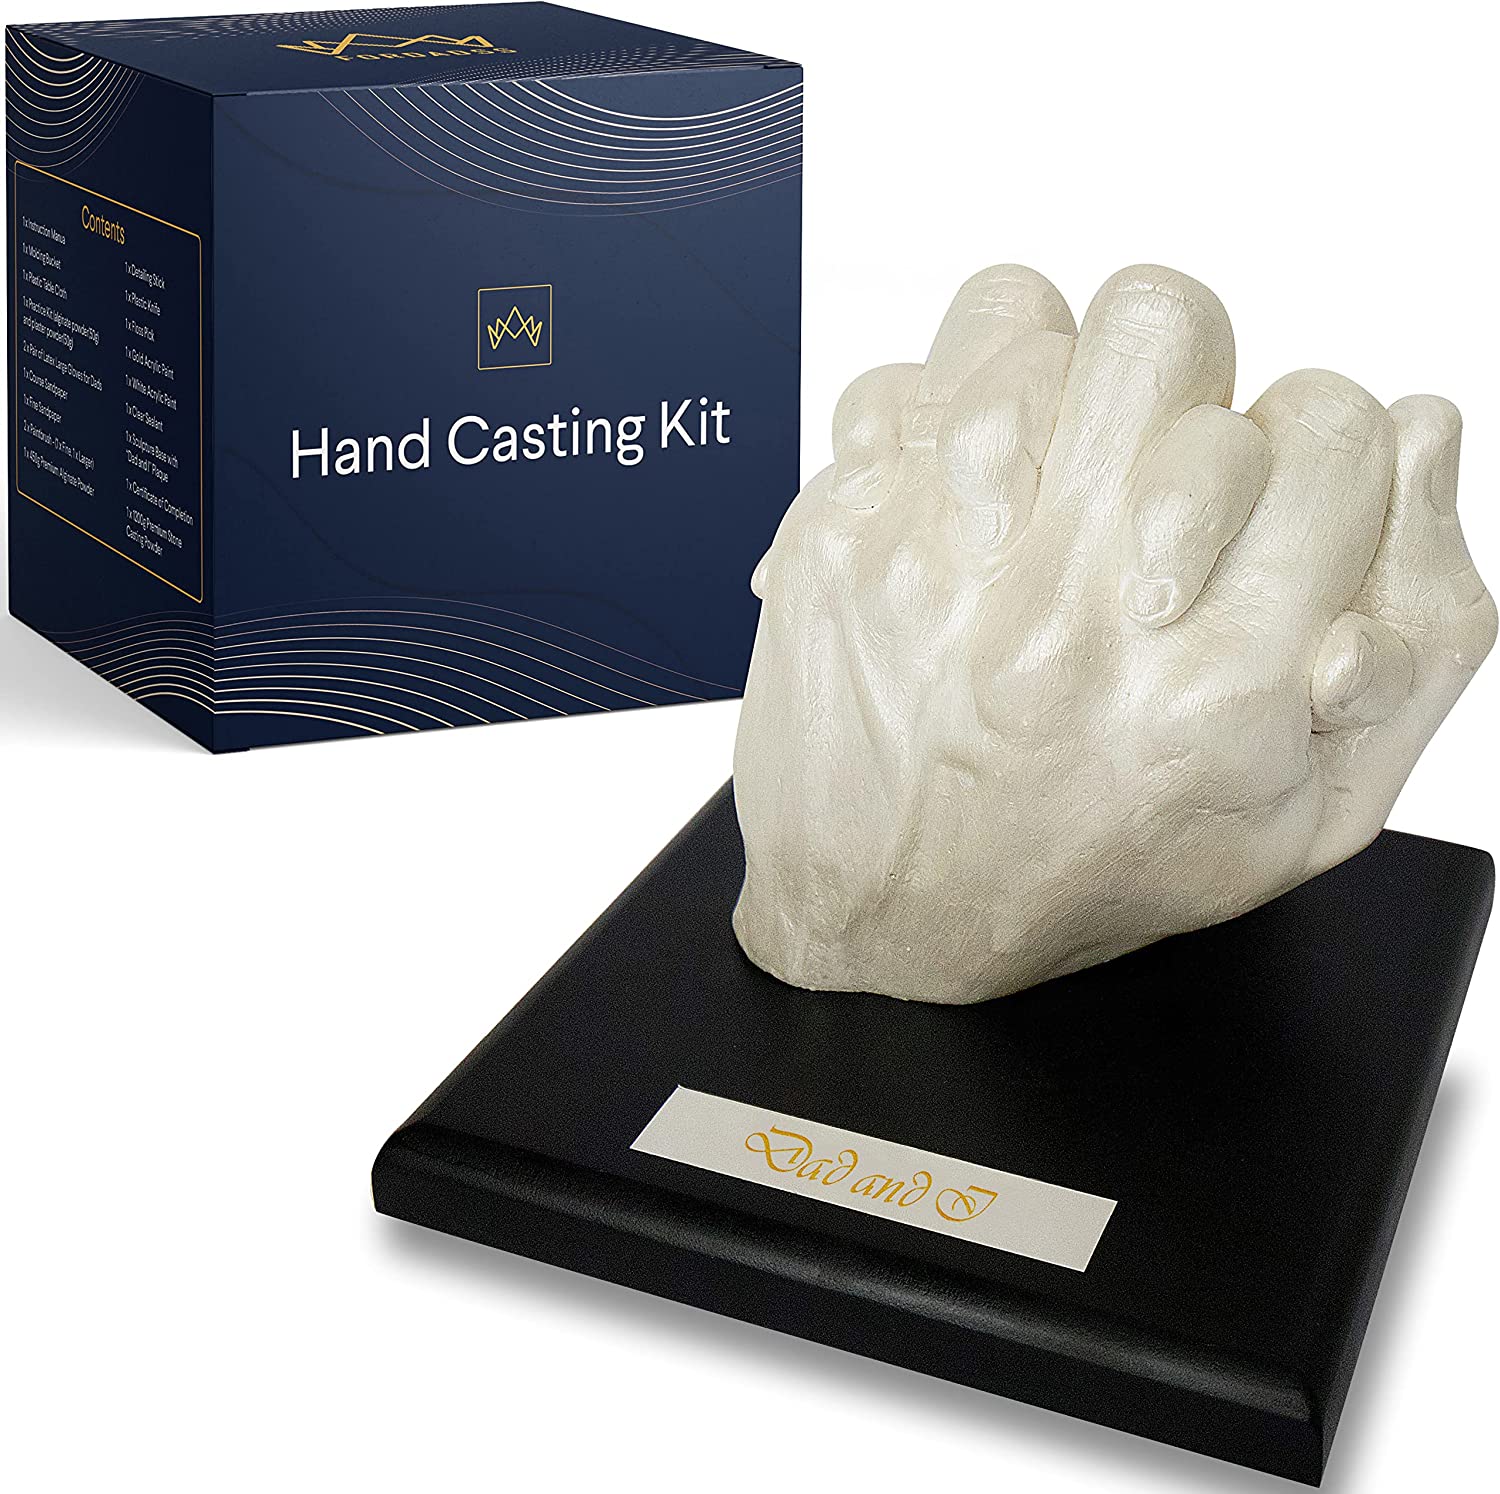 FORDADSS Premium Hand Casting Kit - 17 Piece Set, Couples, Family, Gift for  Dad, Fathers Day, Birthday, Kids. Plaster DIY Hand Mold Casting Kit to  Immortalize Your Bond in a Timeless Sculpture